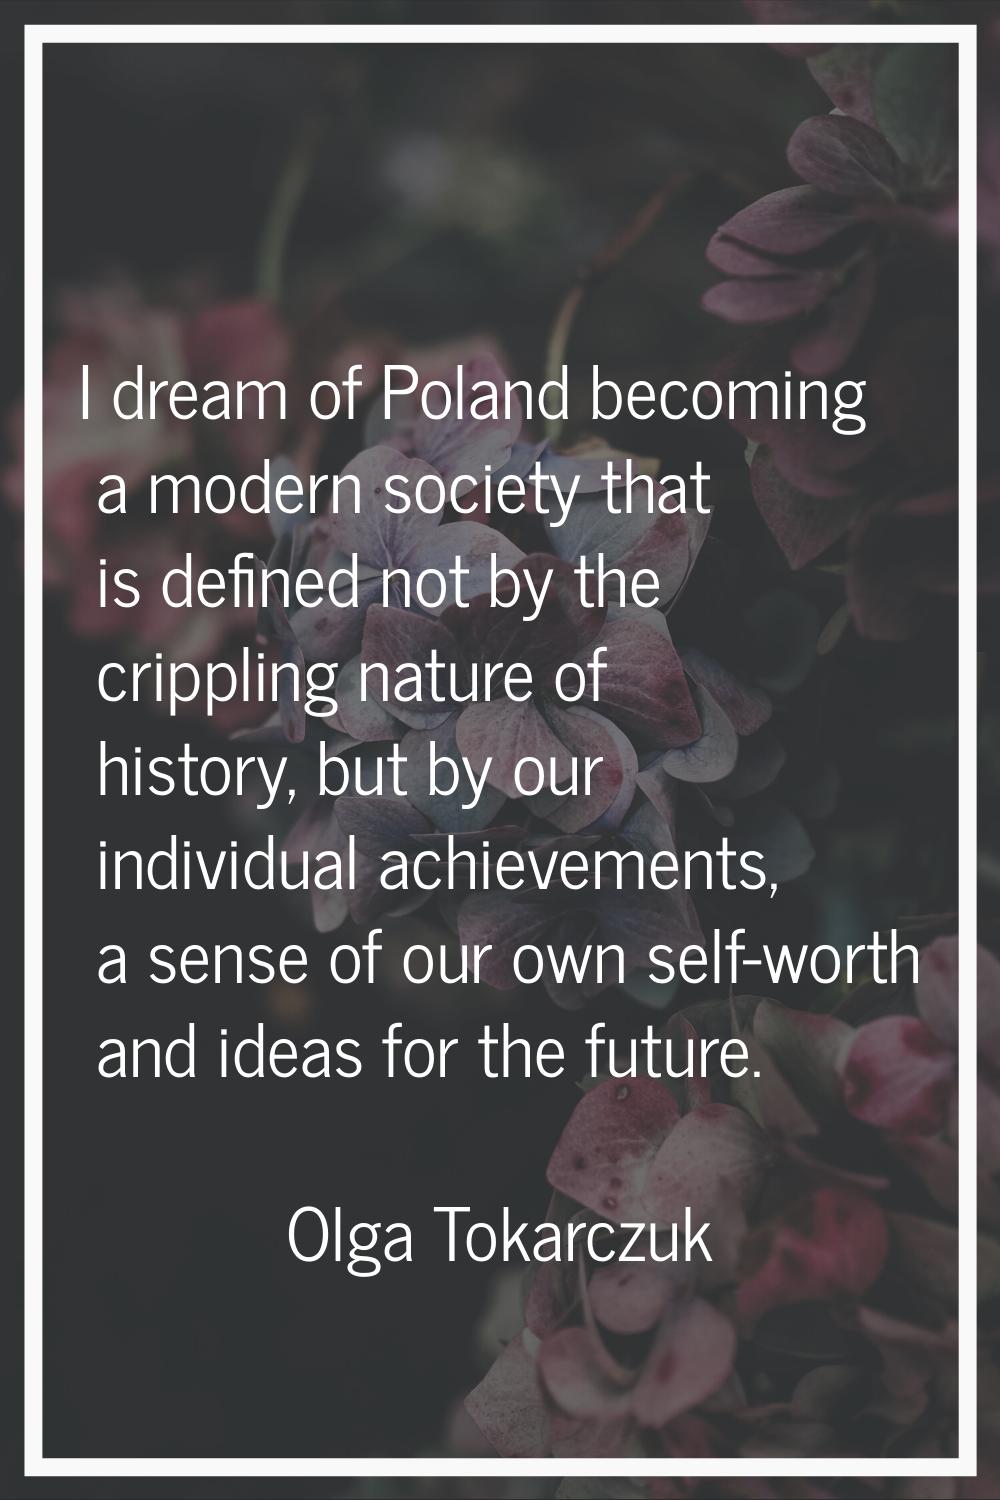 I dream of Poland becoming a modern society that is defined not by the crippling nature of history,